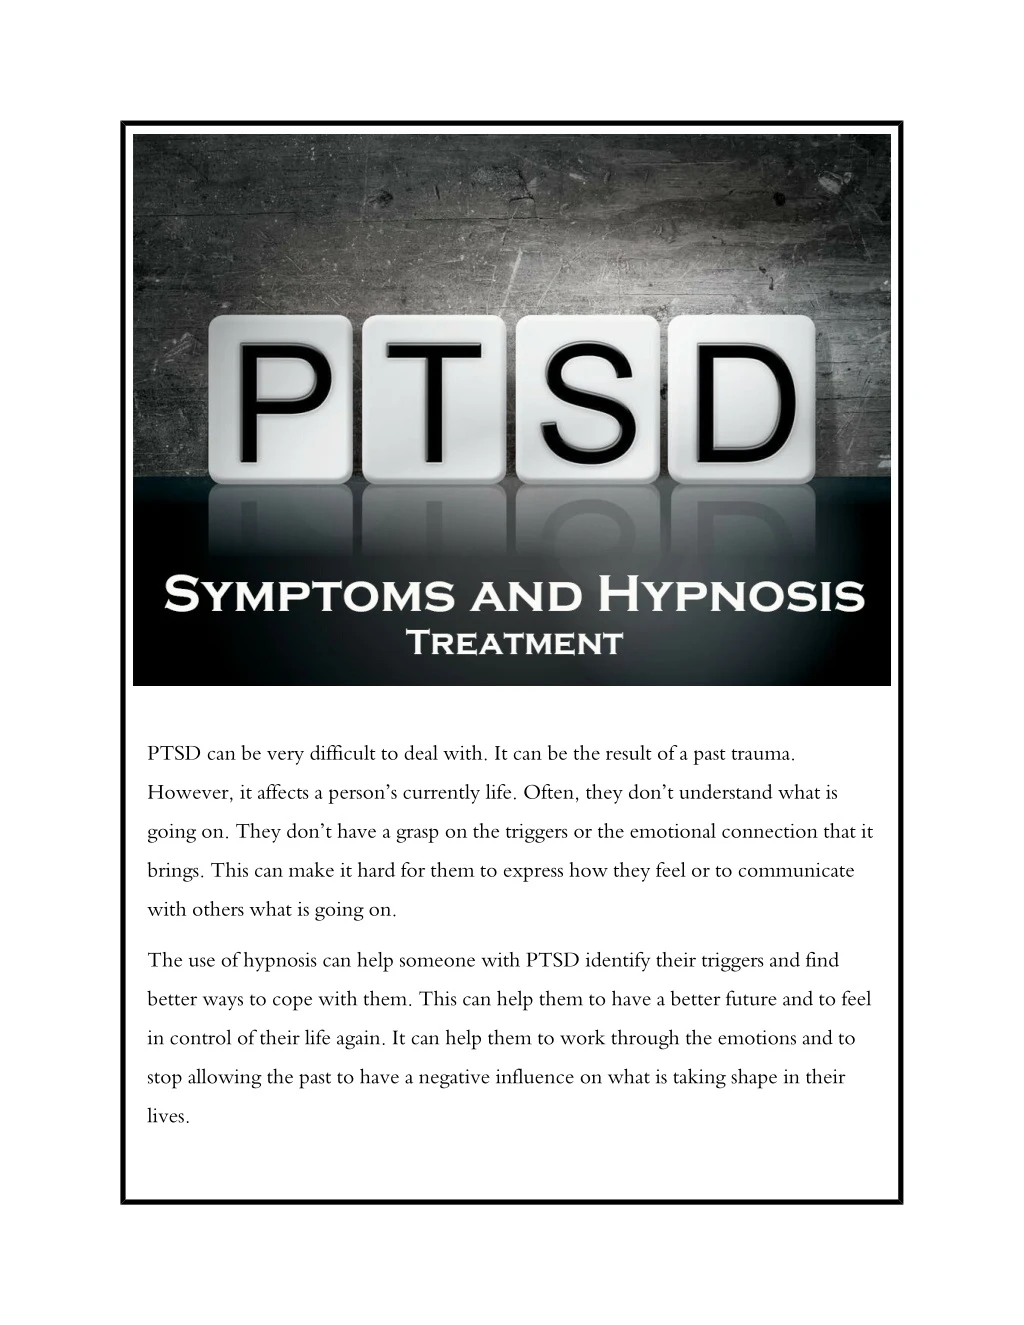 ptsd can be very difficult to deal with